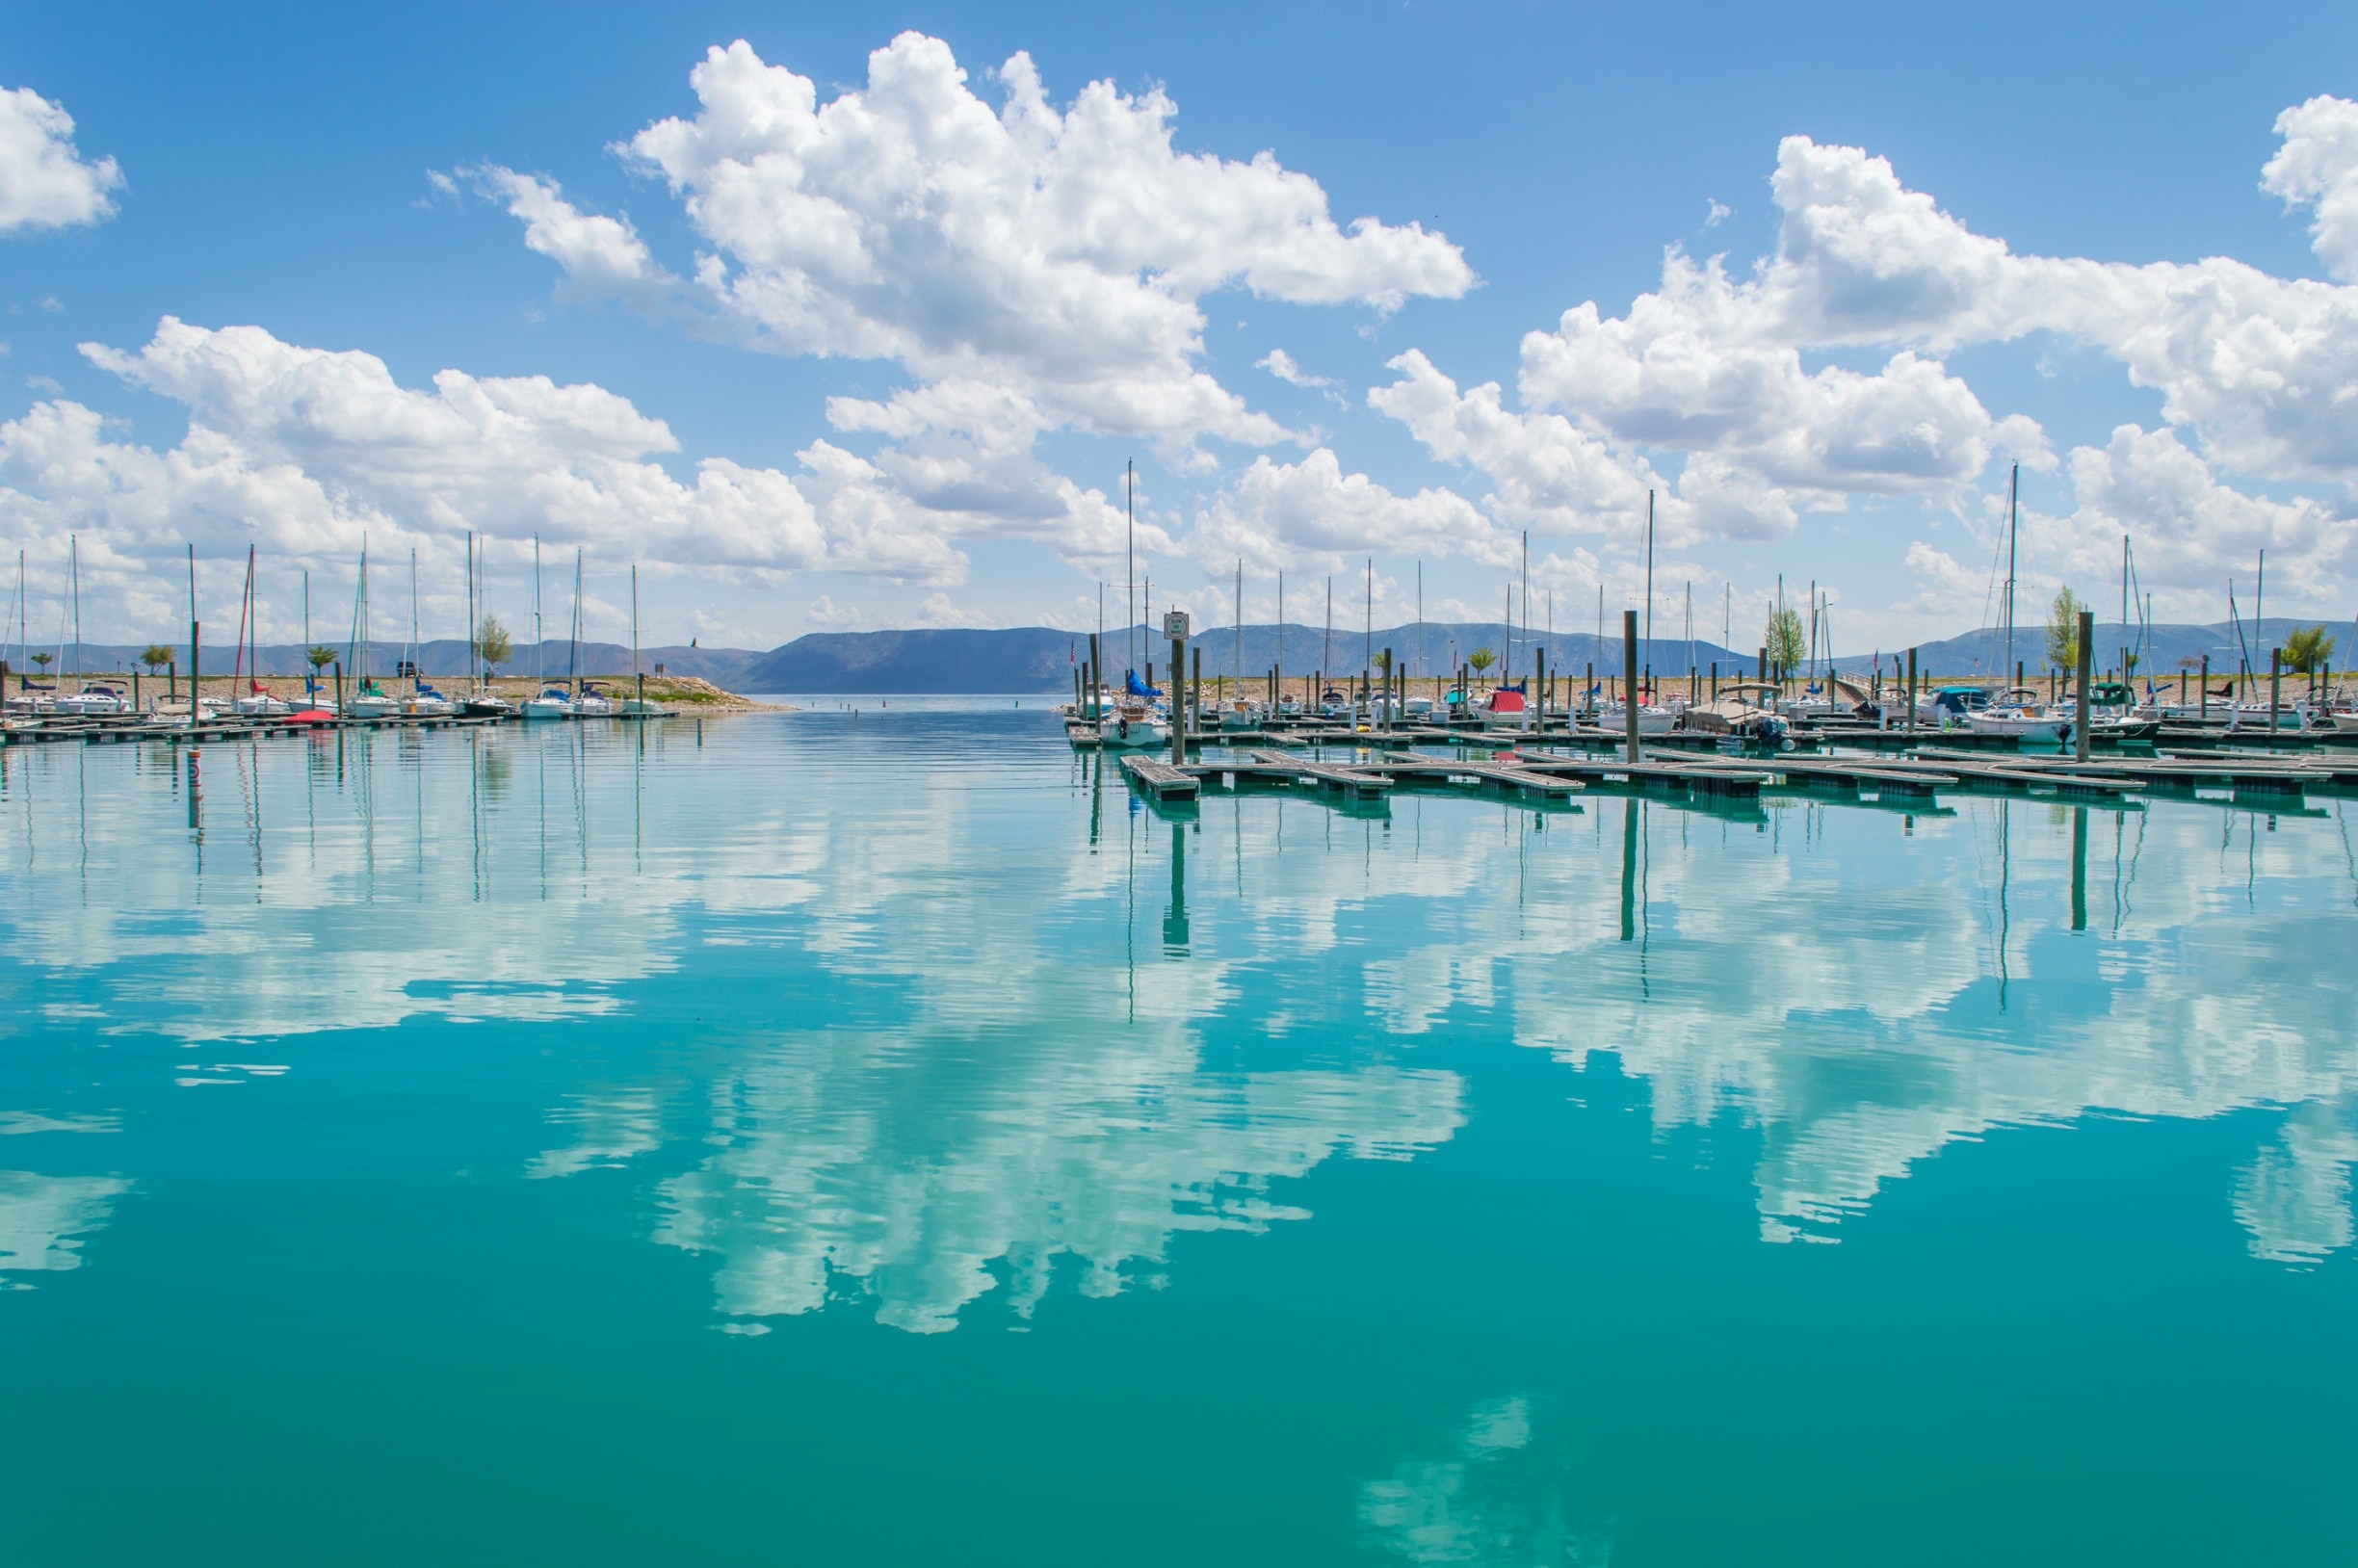 The water in Utah's Bear Lake is an impossible shade of turquoise blue. It's been nicknamed the "Caribbean of the Rockies" because of its beautiful color, a result of limestone deposits in the water. #utah #bearlake #blue